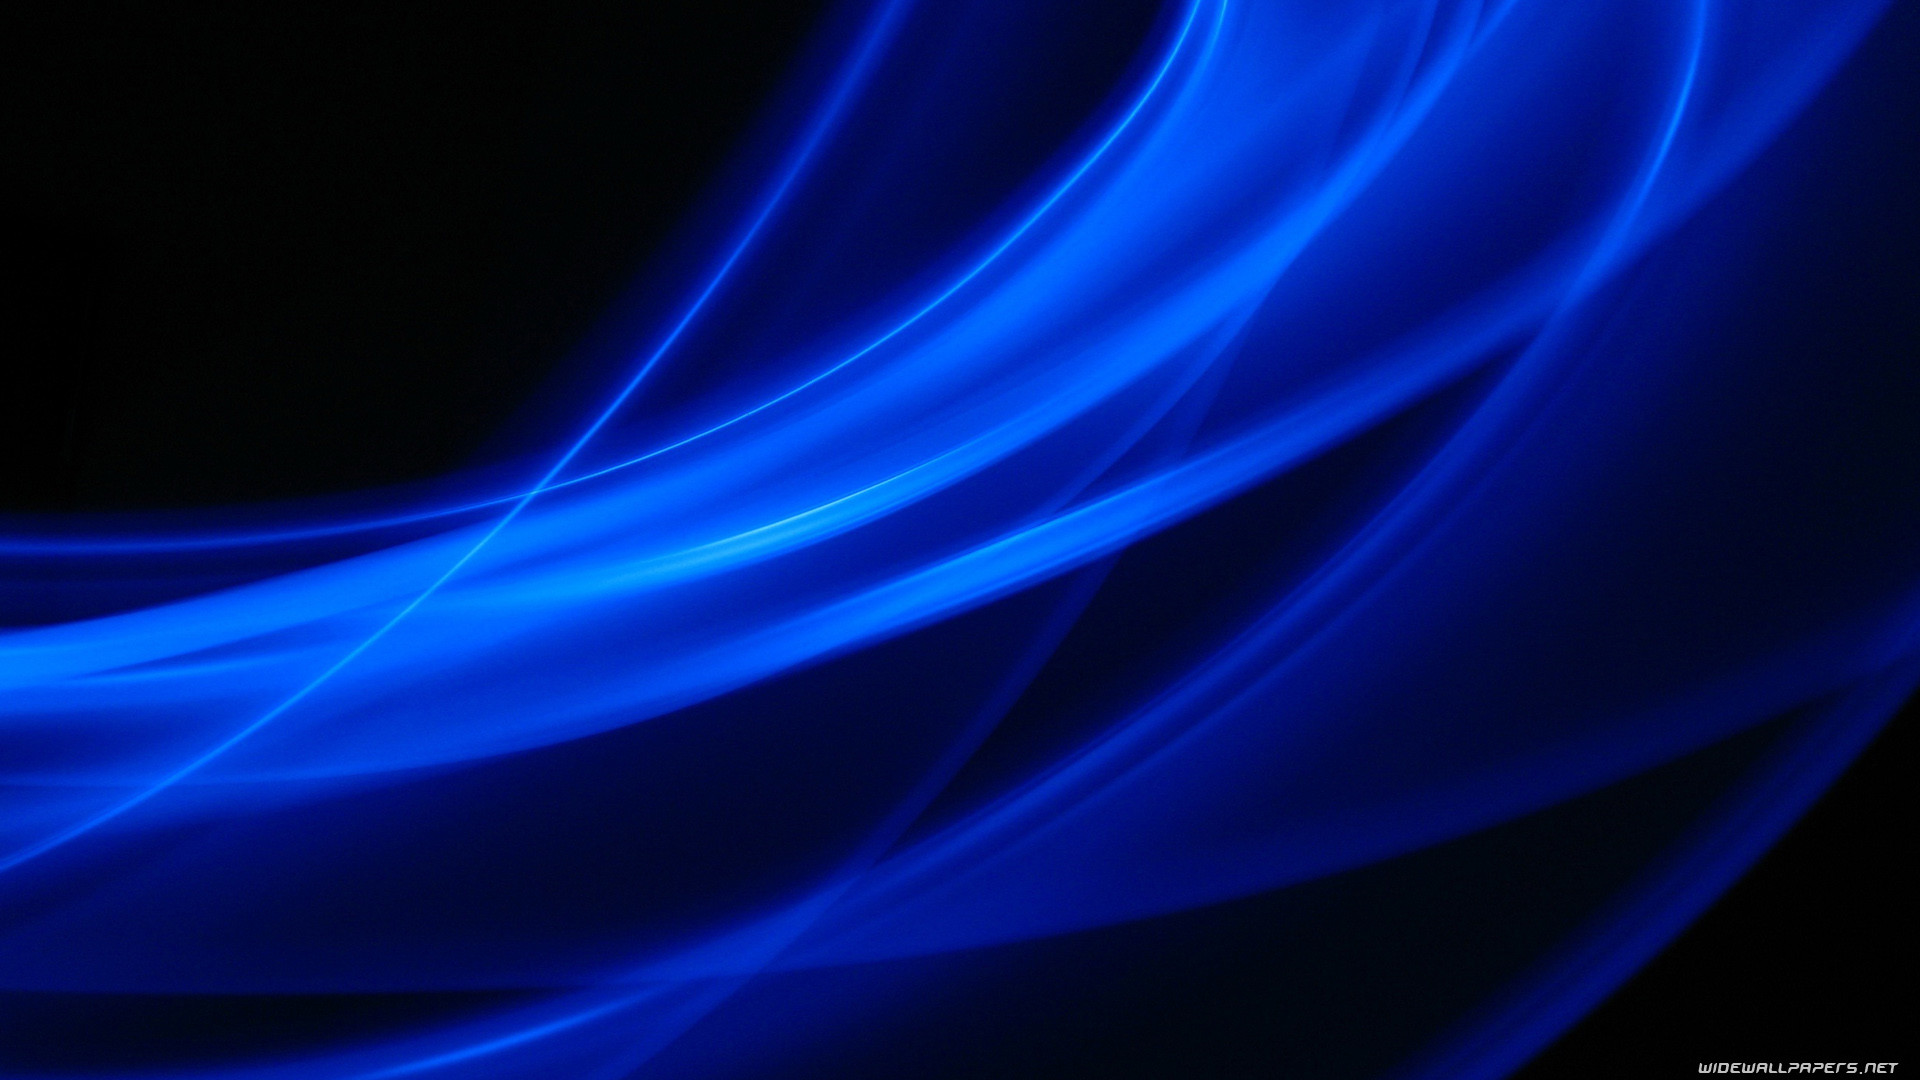 Black and Blue Abstract Widescreen HD Wallpaper